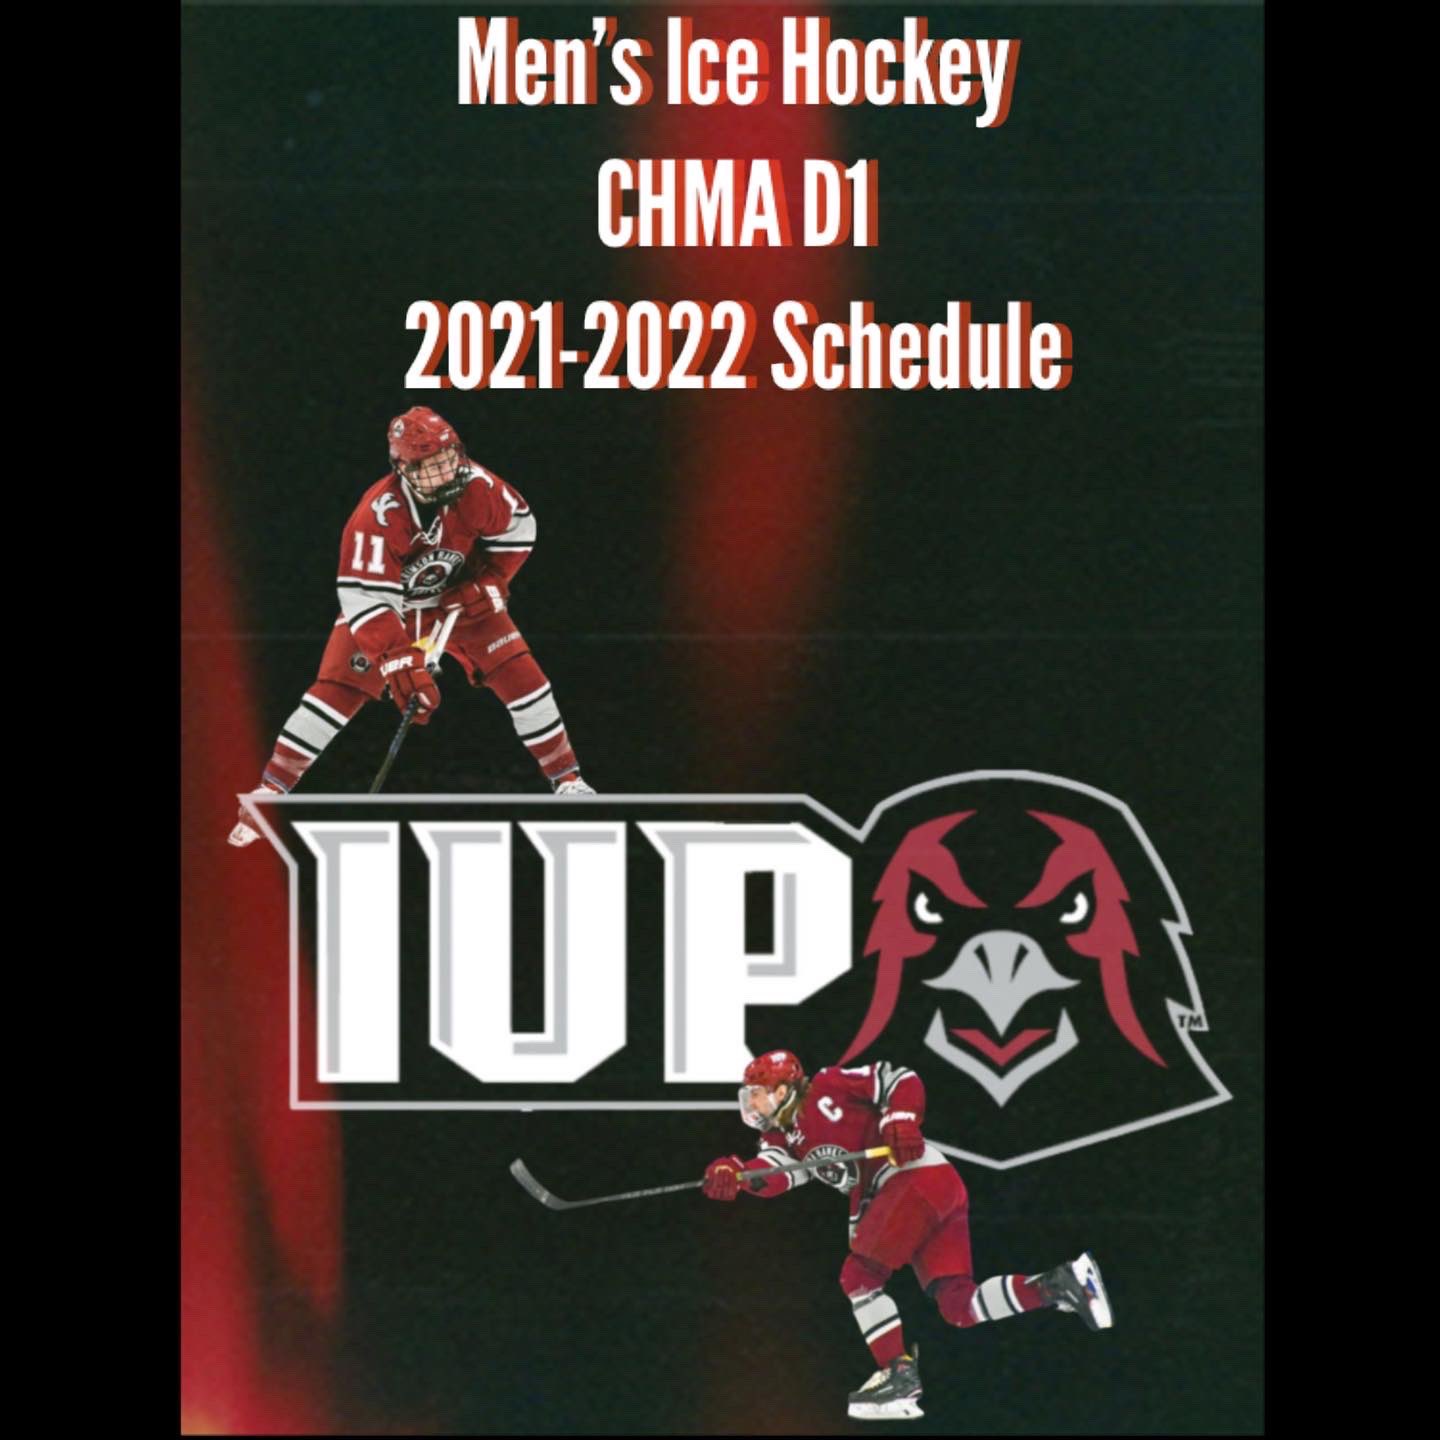 Iup Fall 2022 Schedule Iup Ice Hockey On Twitter: "Introducing Our 2021-2022 Schedule.  Https://T.co/Cxk8Gexs8D" / Twitter